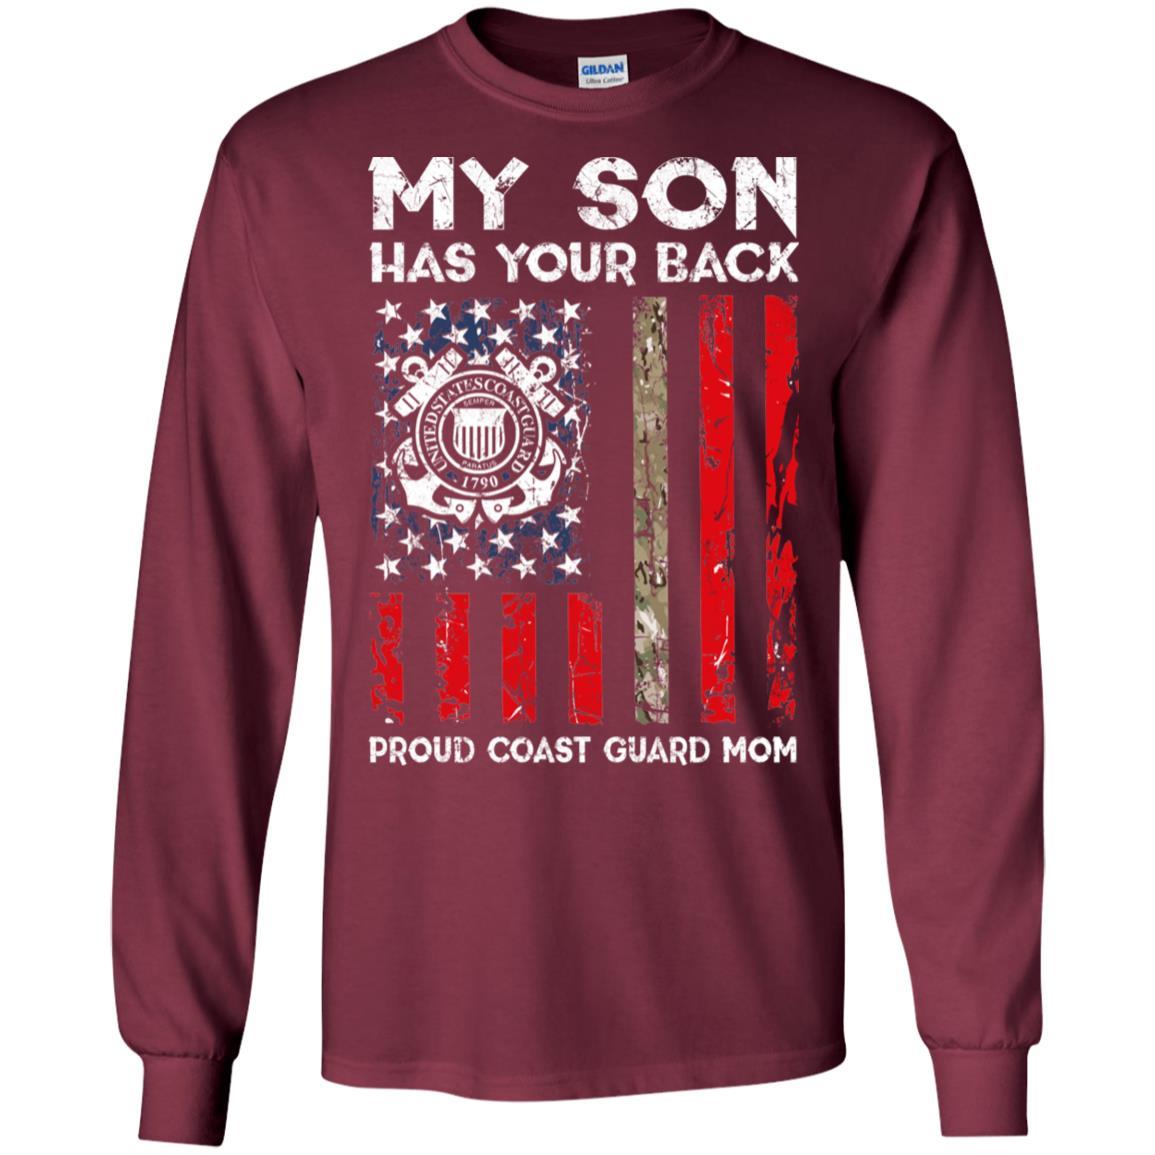 My Son Has Your Back - Proud Coast Guard Mom Men T Shirt On Front-TShirt-USCG-Veterans Nation